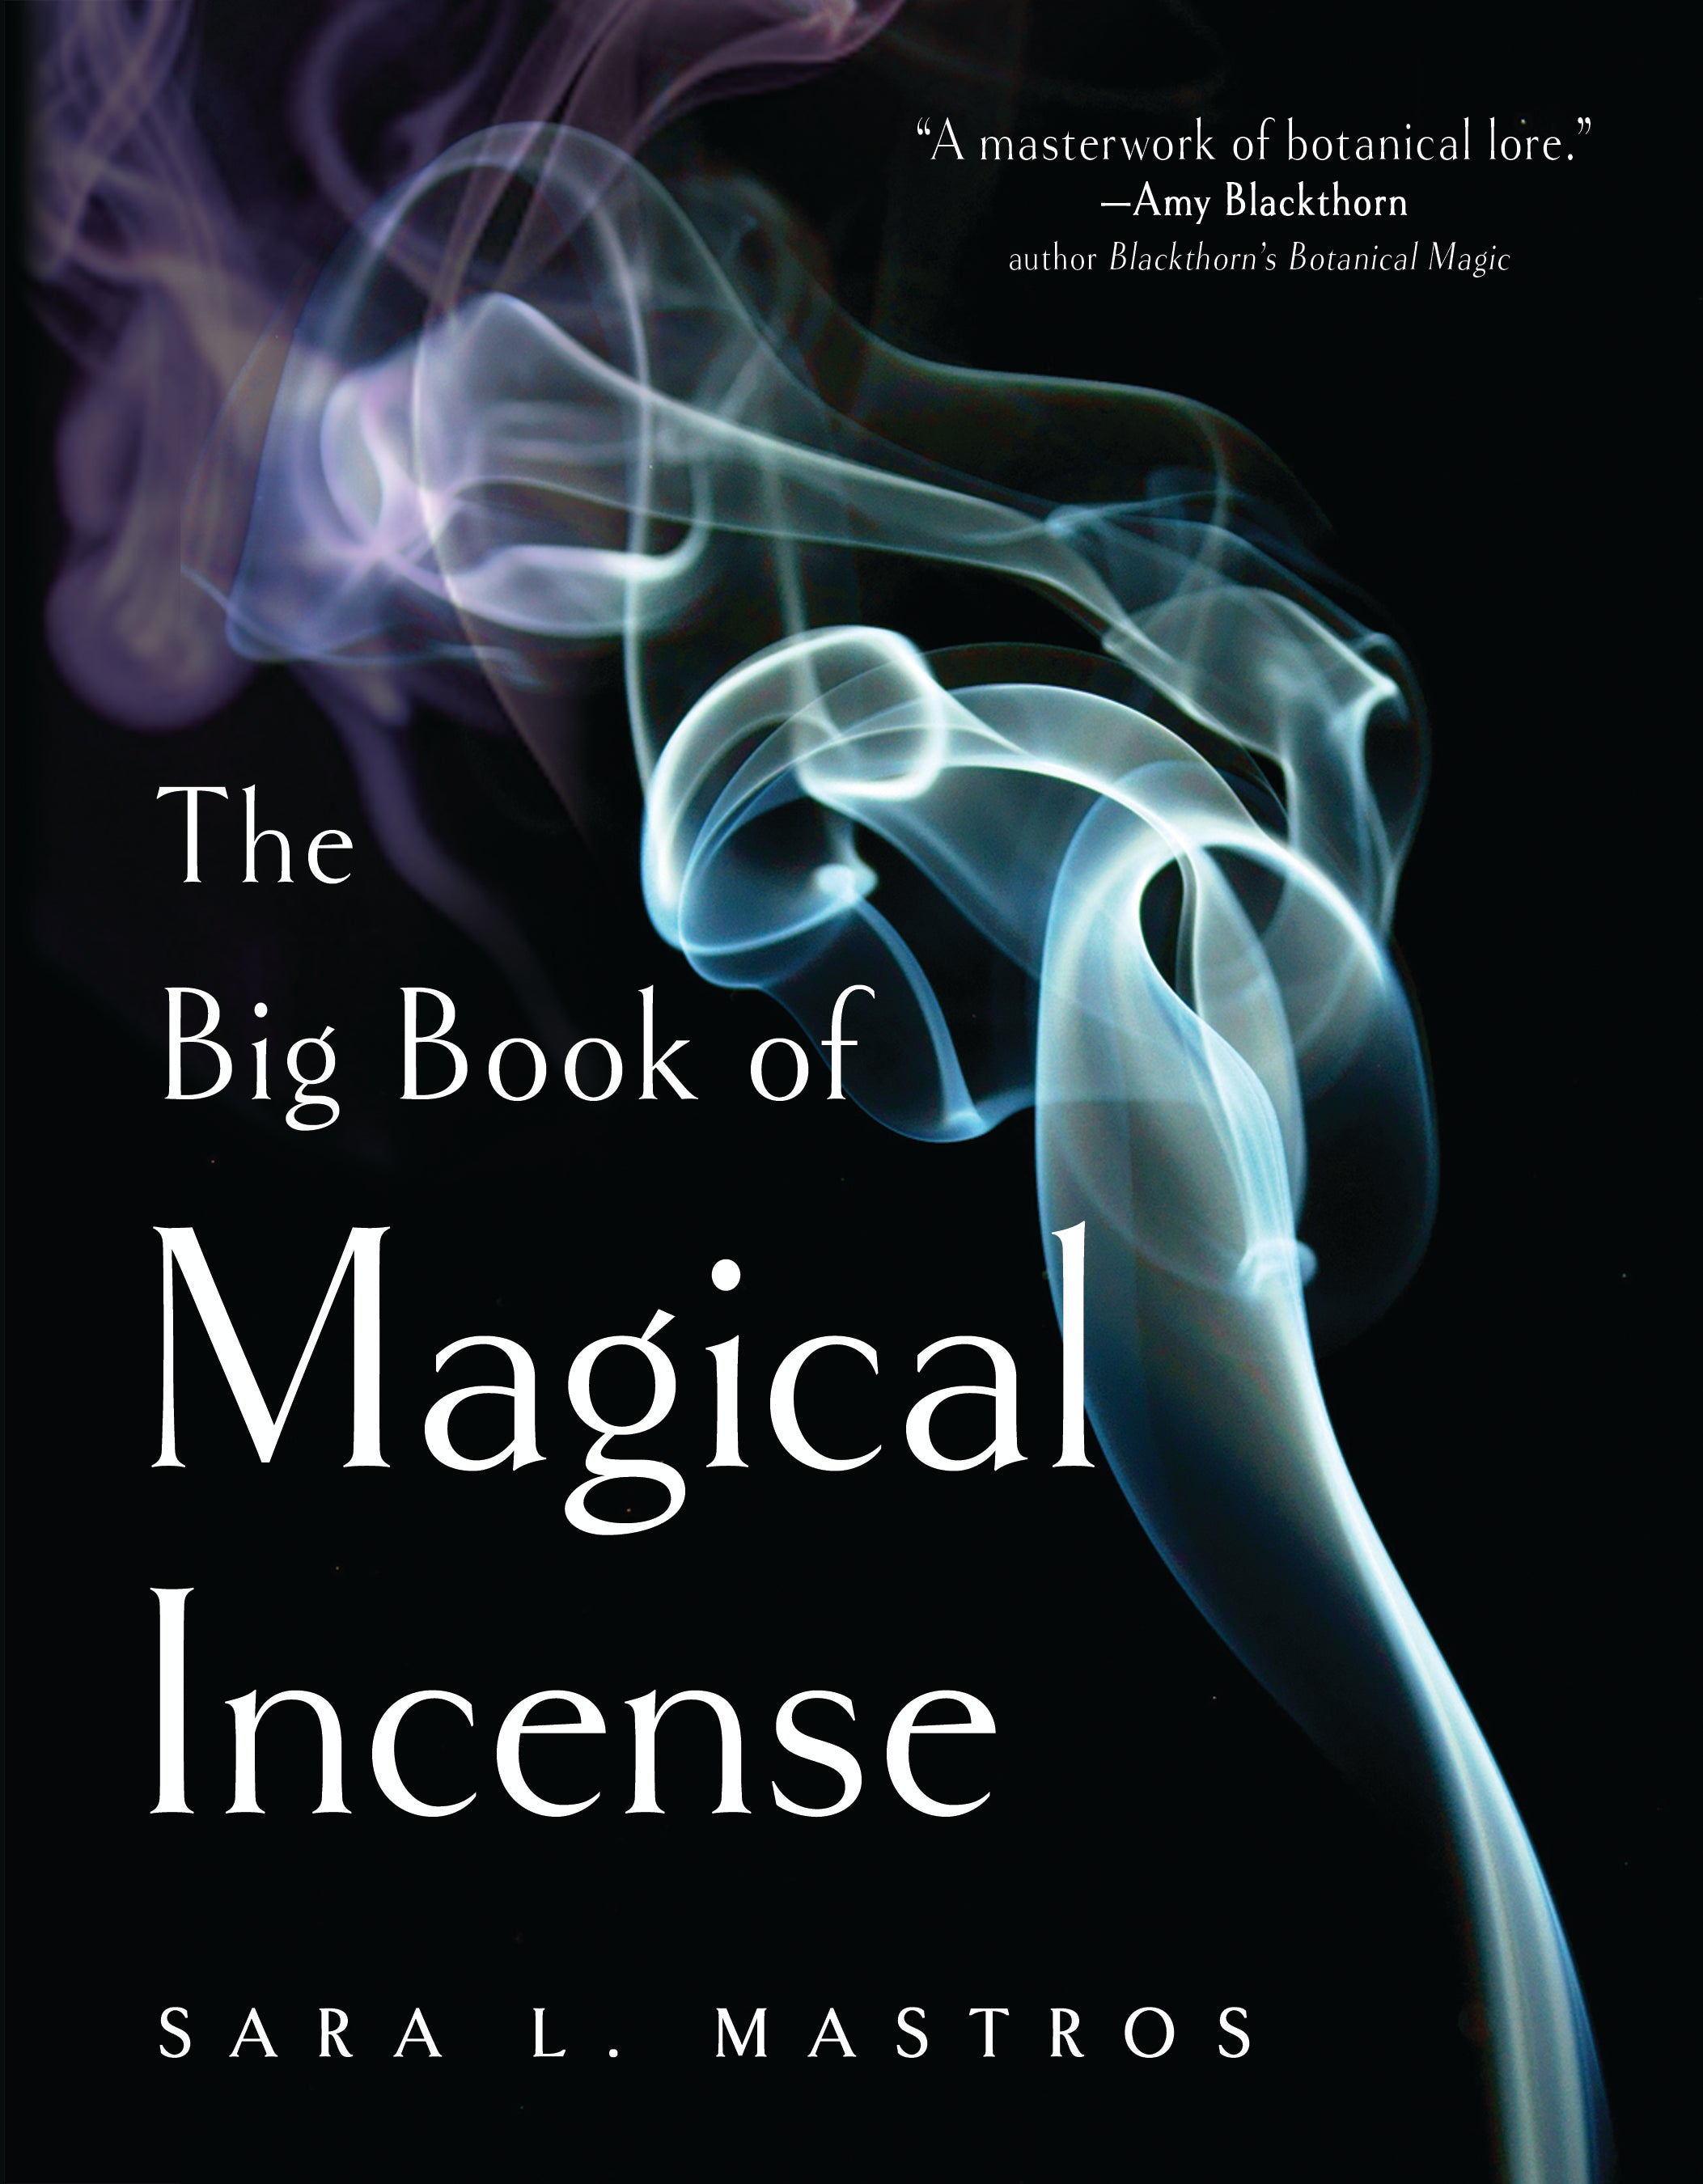 The Big Book of Magical Incense